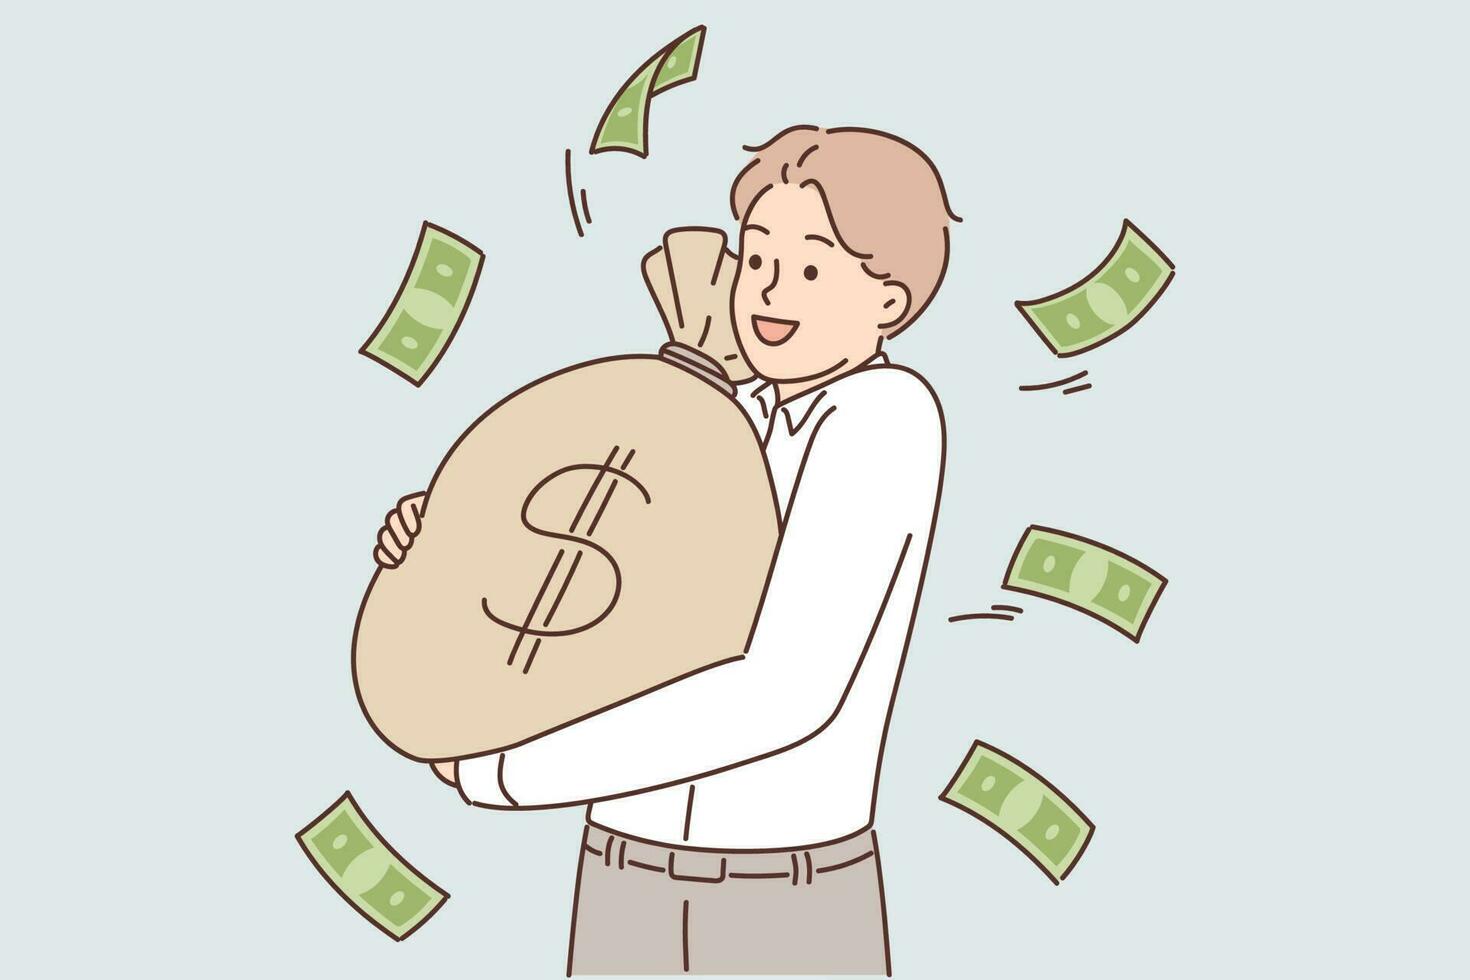 Successful businessman carrying big bag of cash earned from investment or sale of company. Businessman holding dollar bills smiling and wishing to deposit money or invest in securities vector